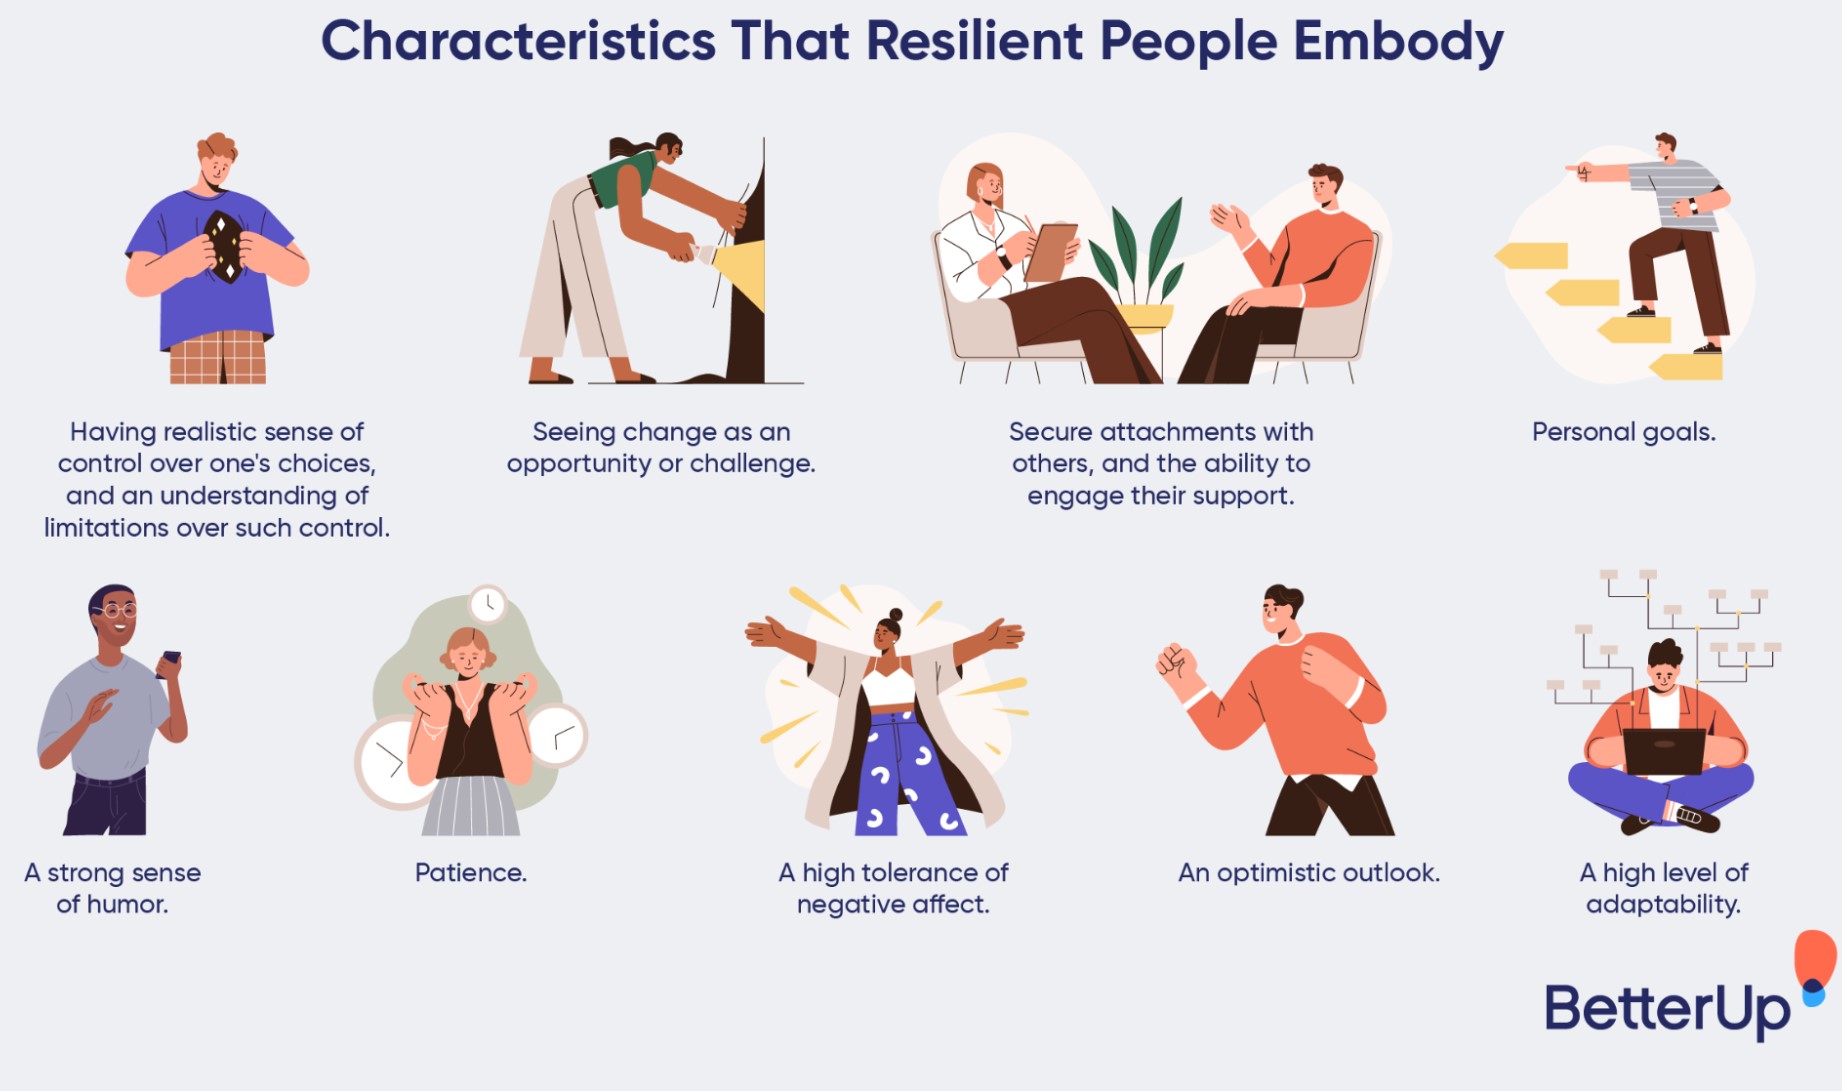 Health and resilience-building strategies